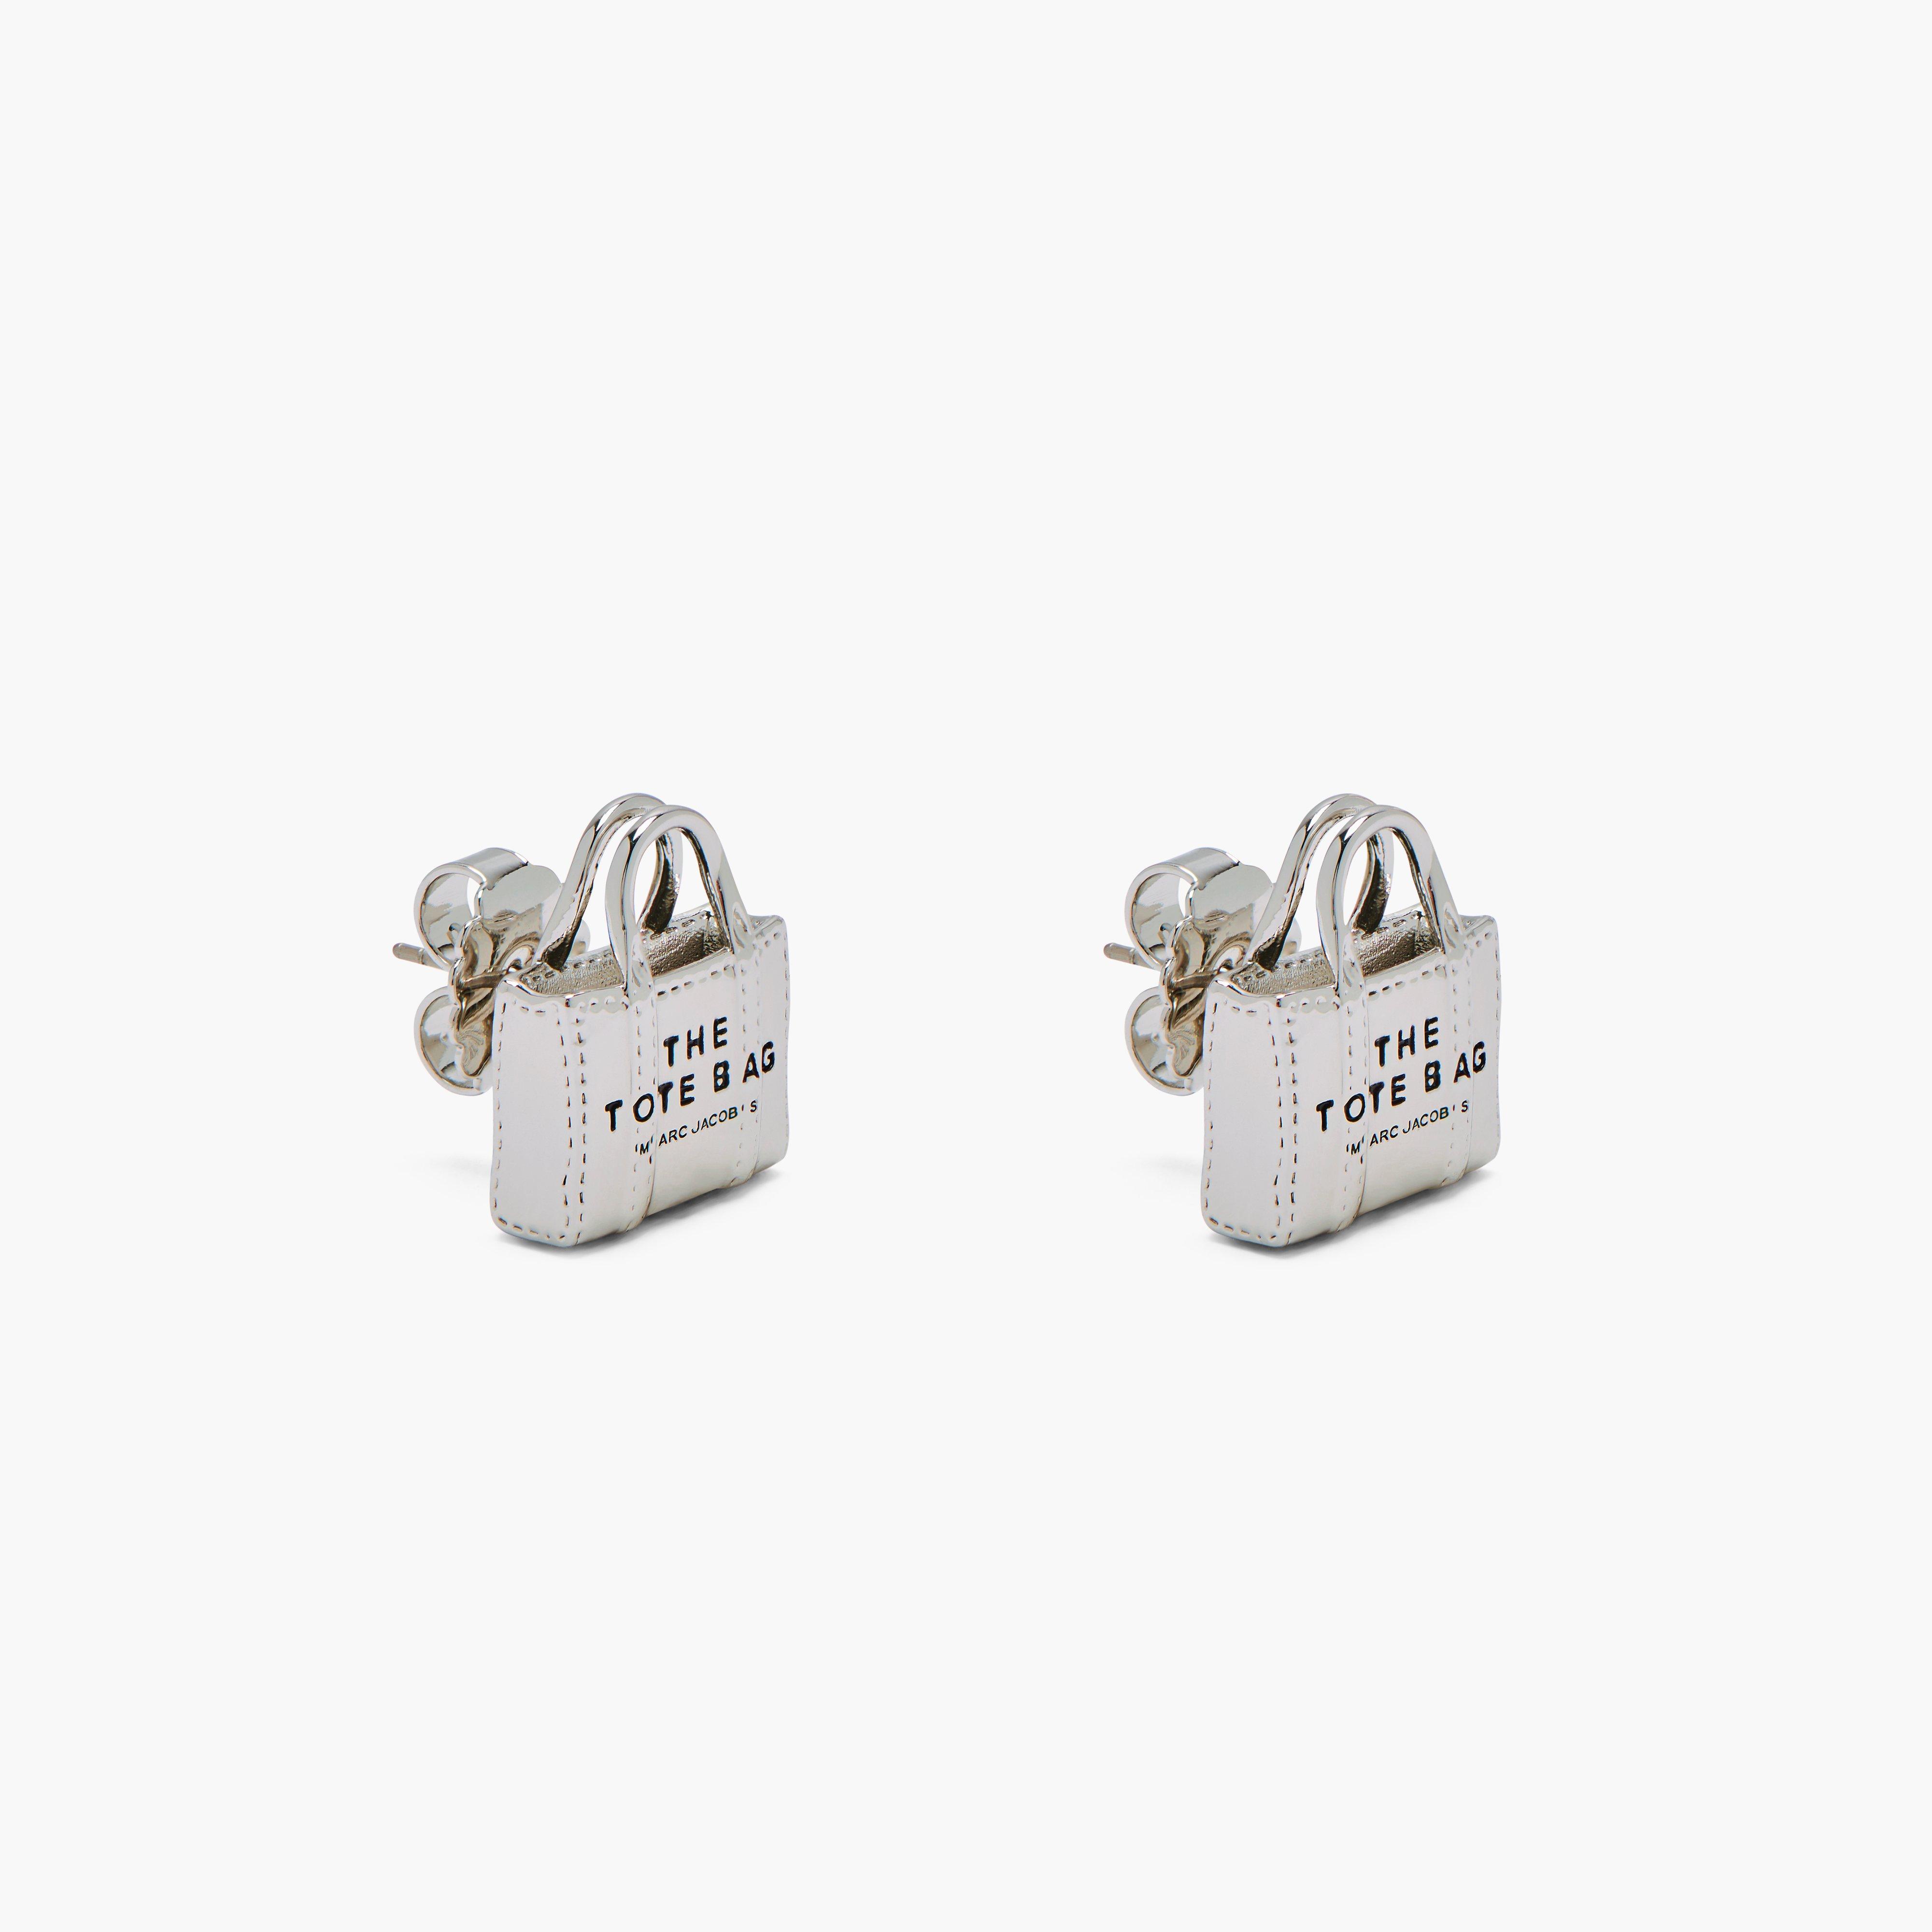 Marc by Marc jacobs The Tote Bag Studs,LIGHT ANTIQUE SILVER